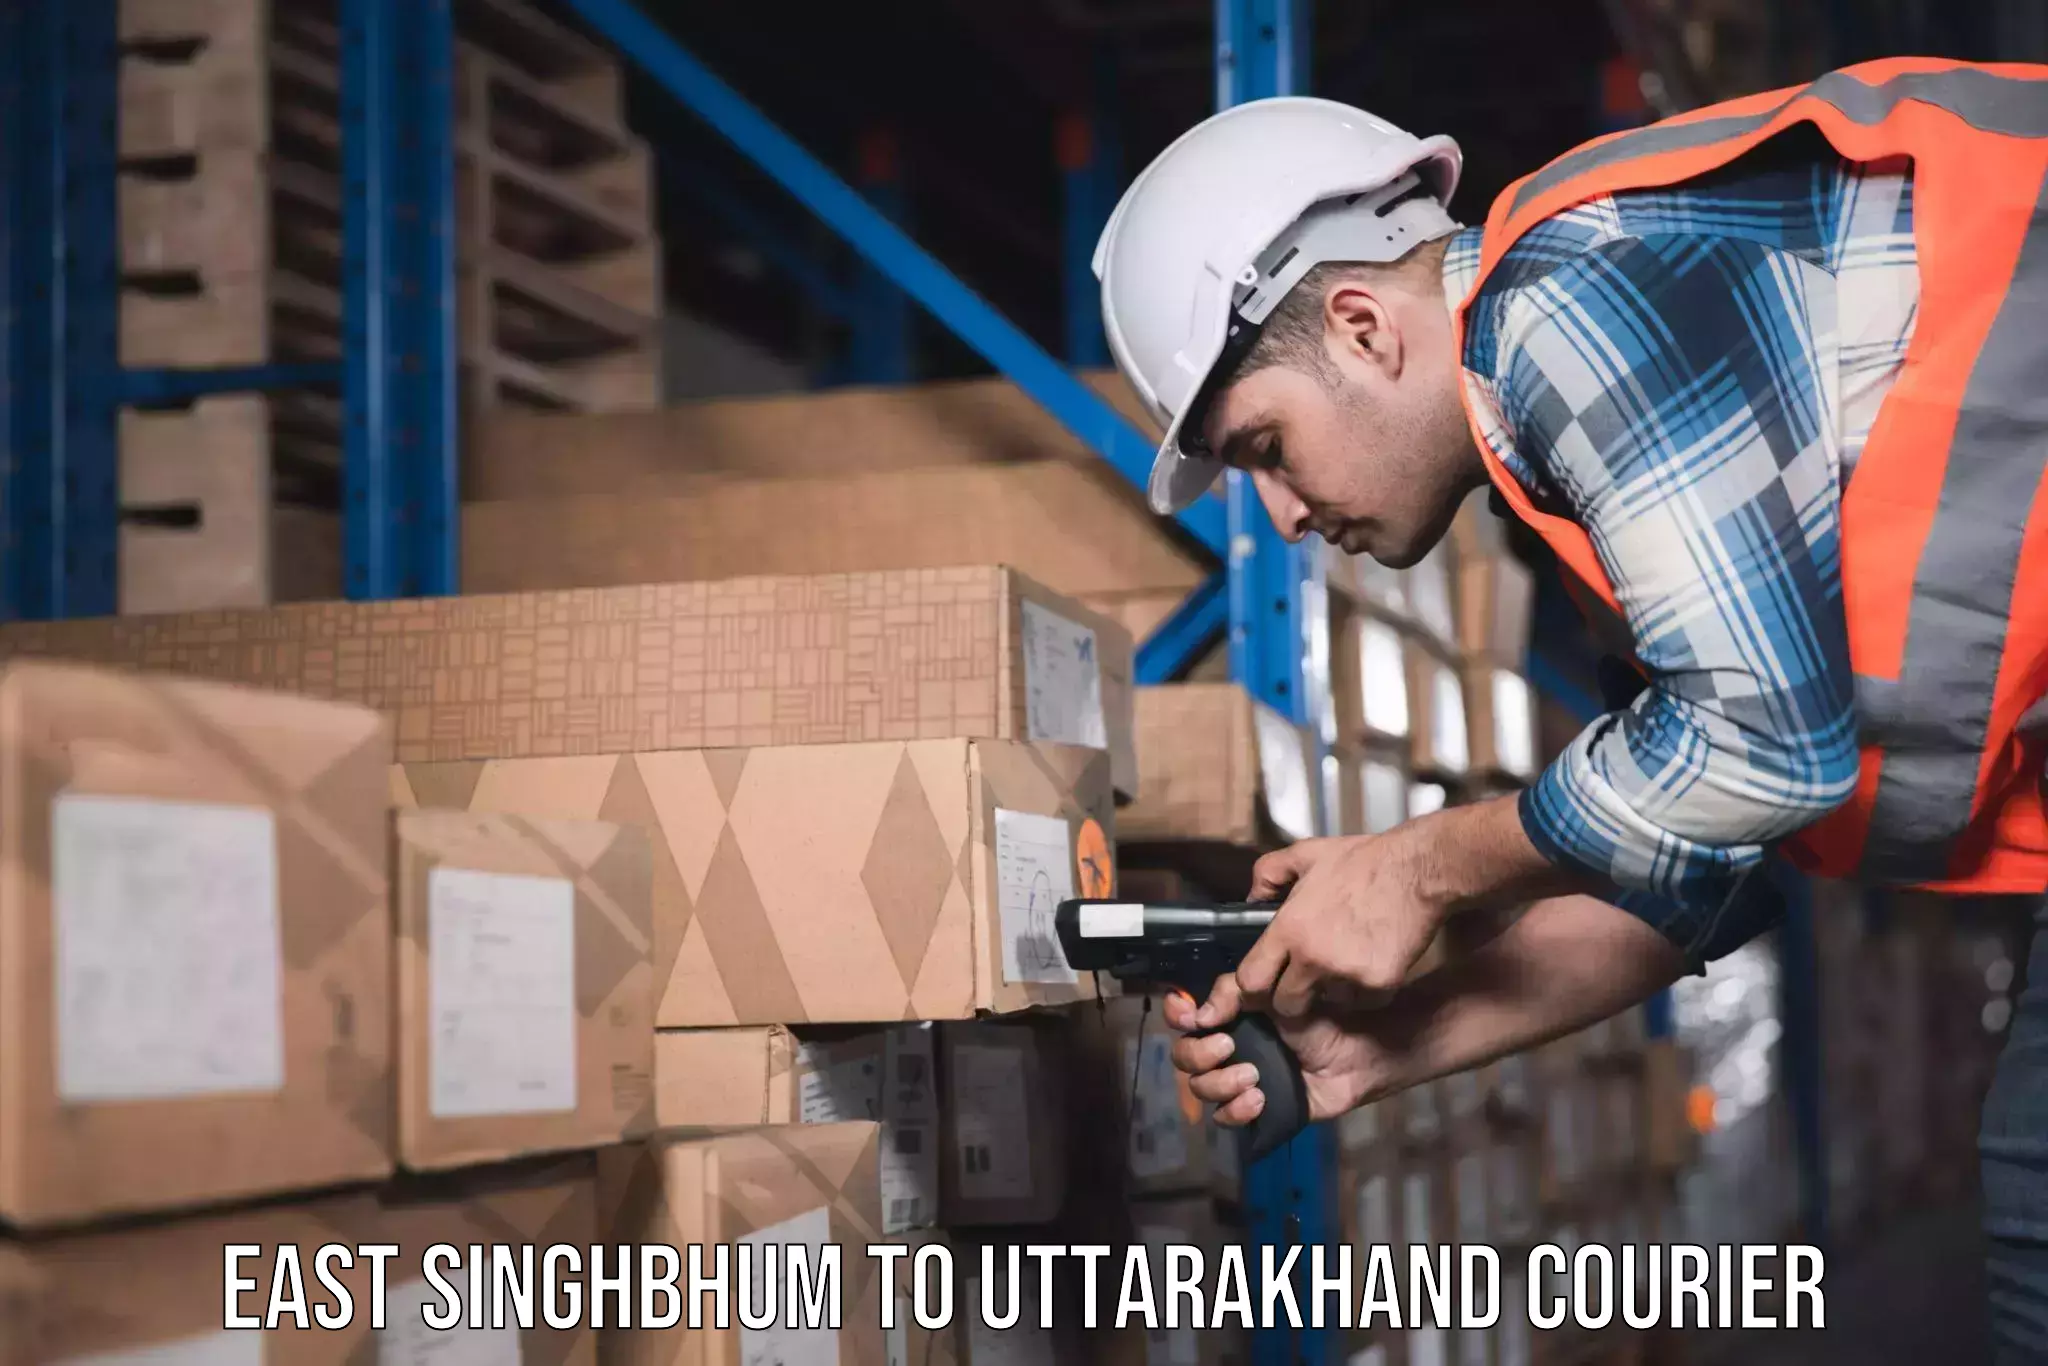 Furniture moving experts East Singhbhum to Bhagwanpur